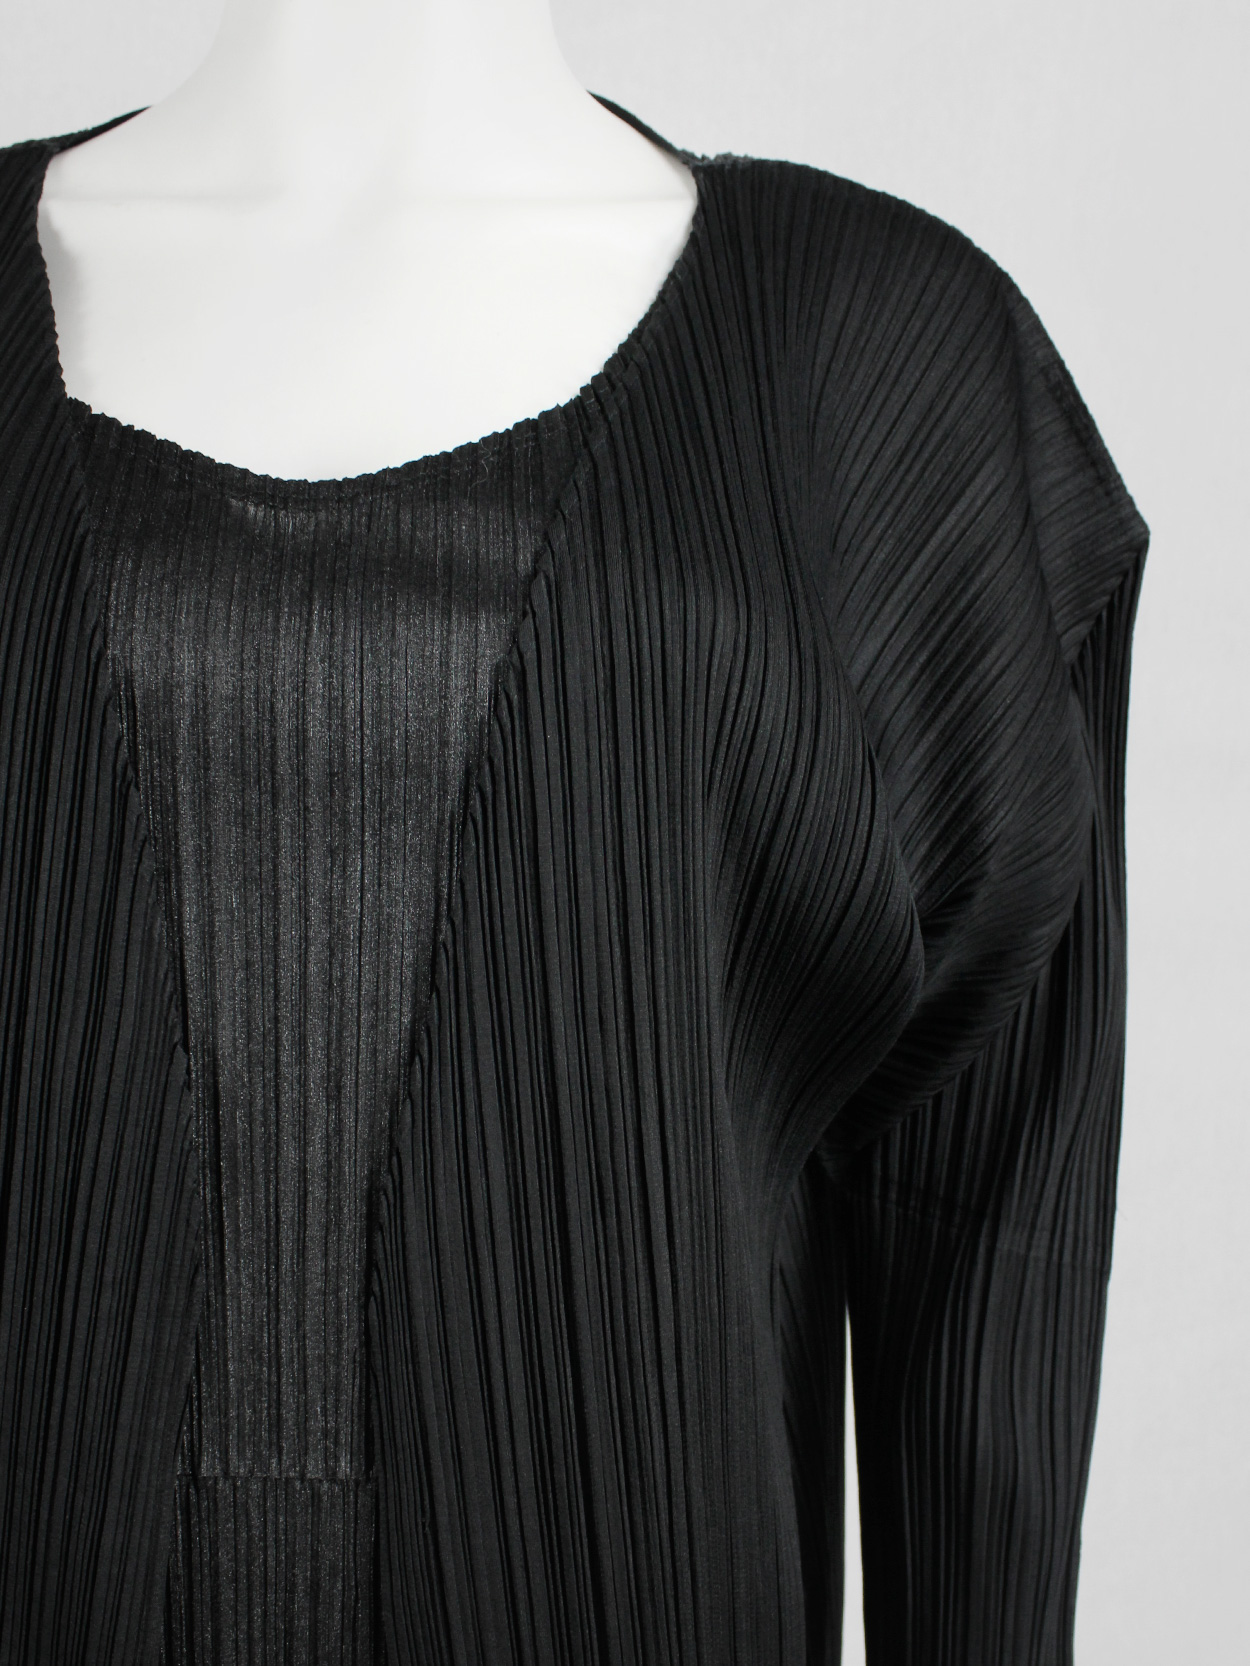 Issey Miyake Pleats Please black cardigan with squared shoulders - V A ...